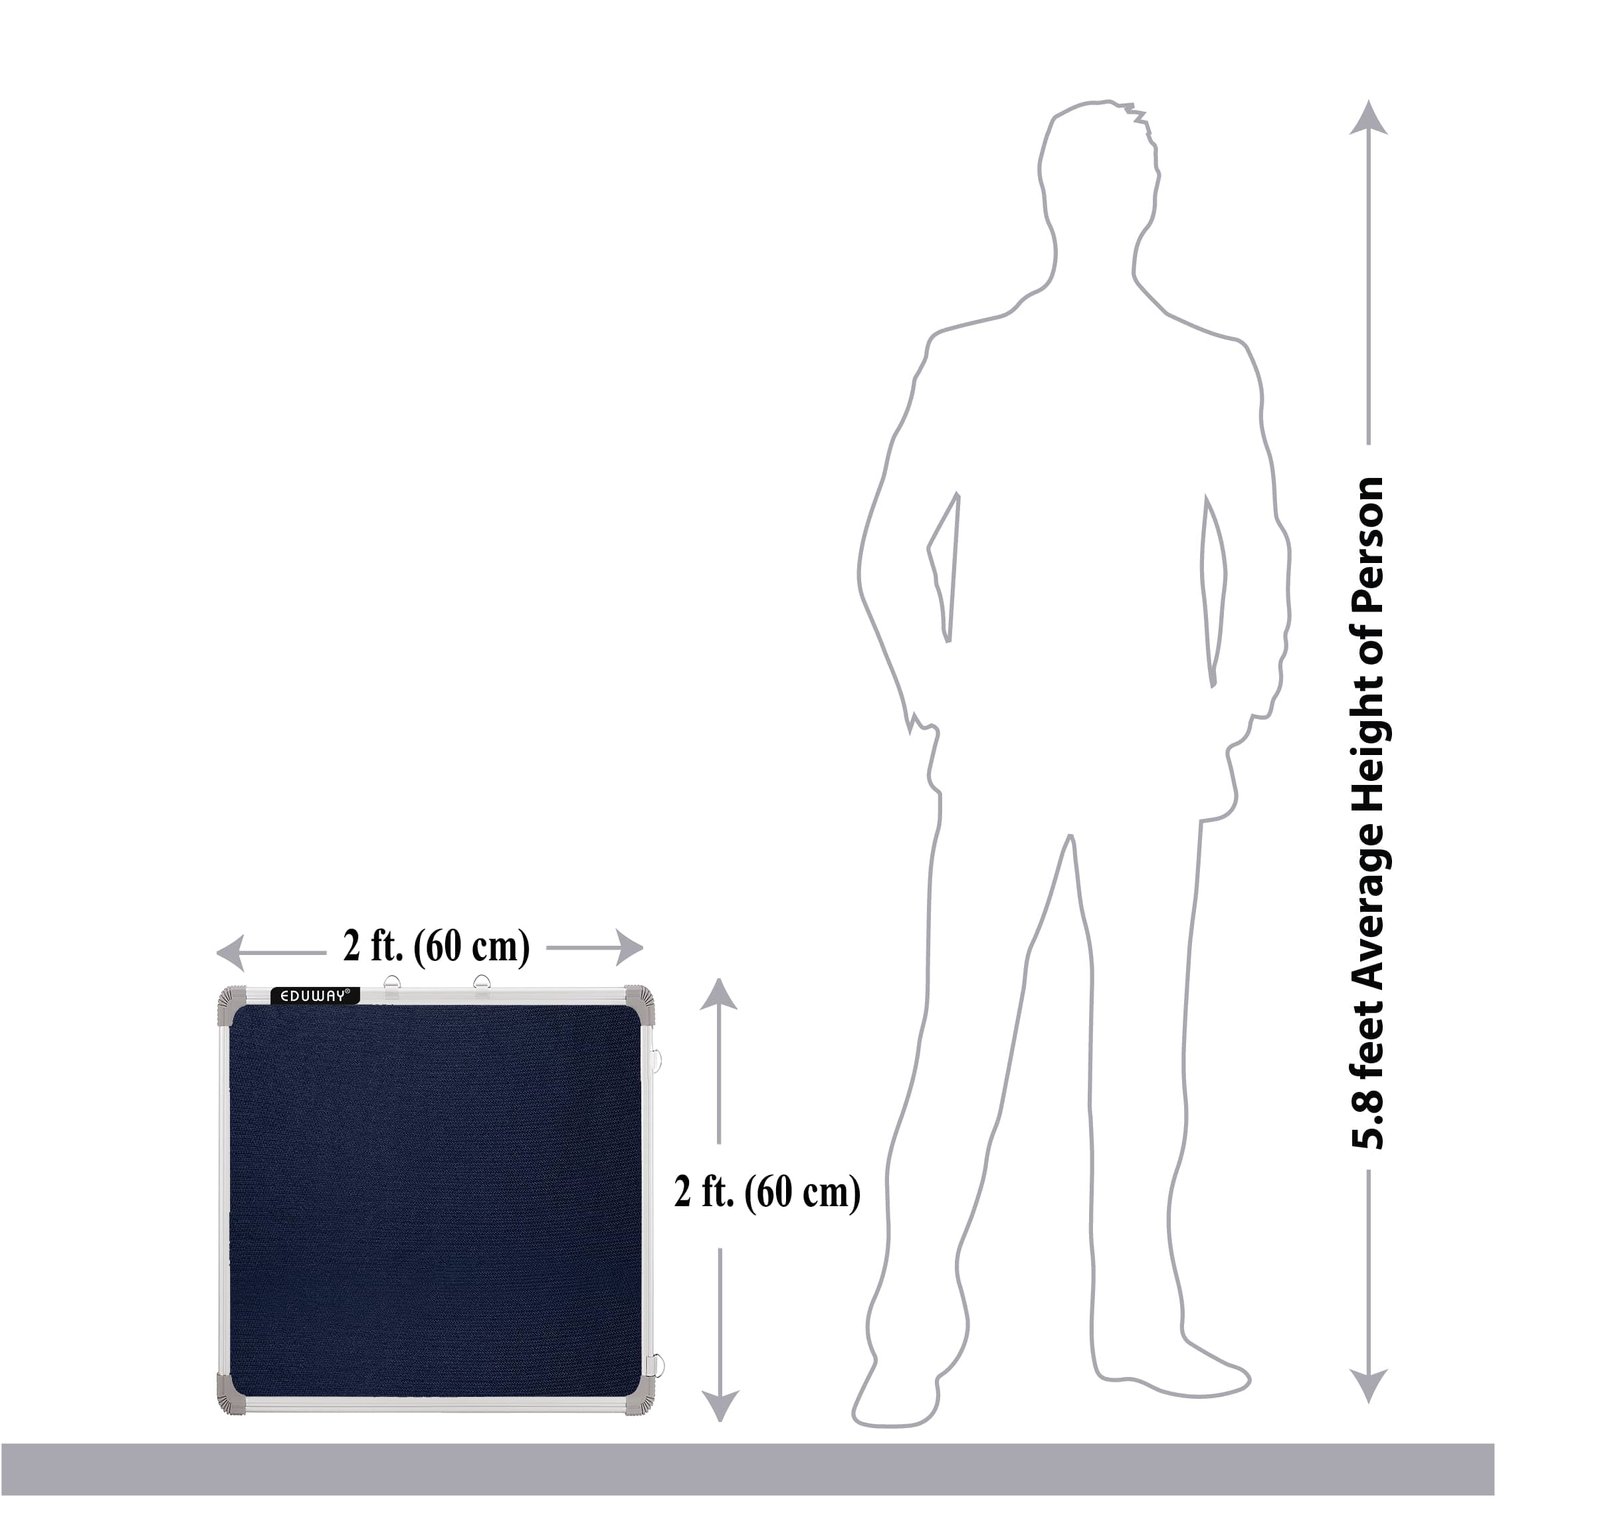 Notice board blue 2x2 ft. pin-up / bulletin/ display board compare with persons height